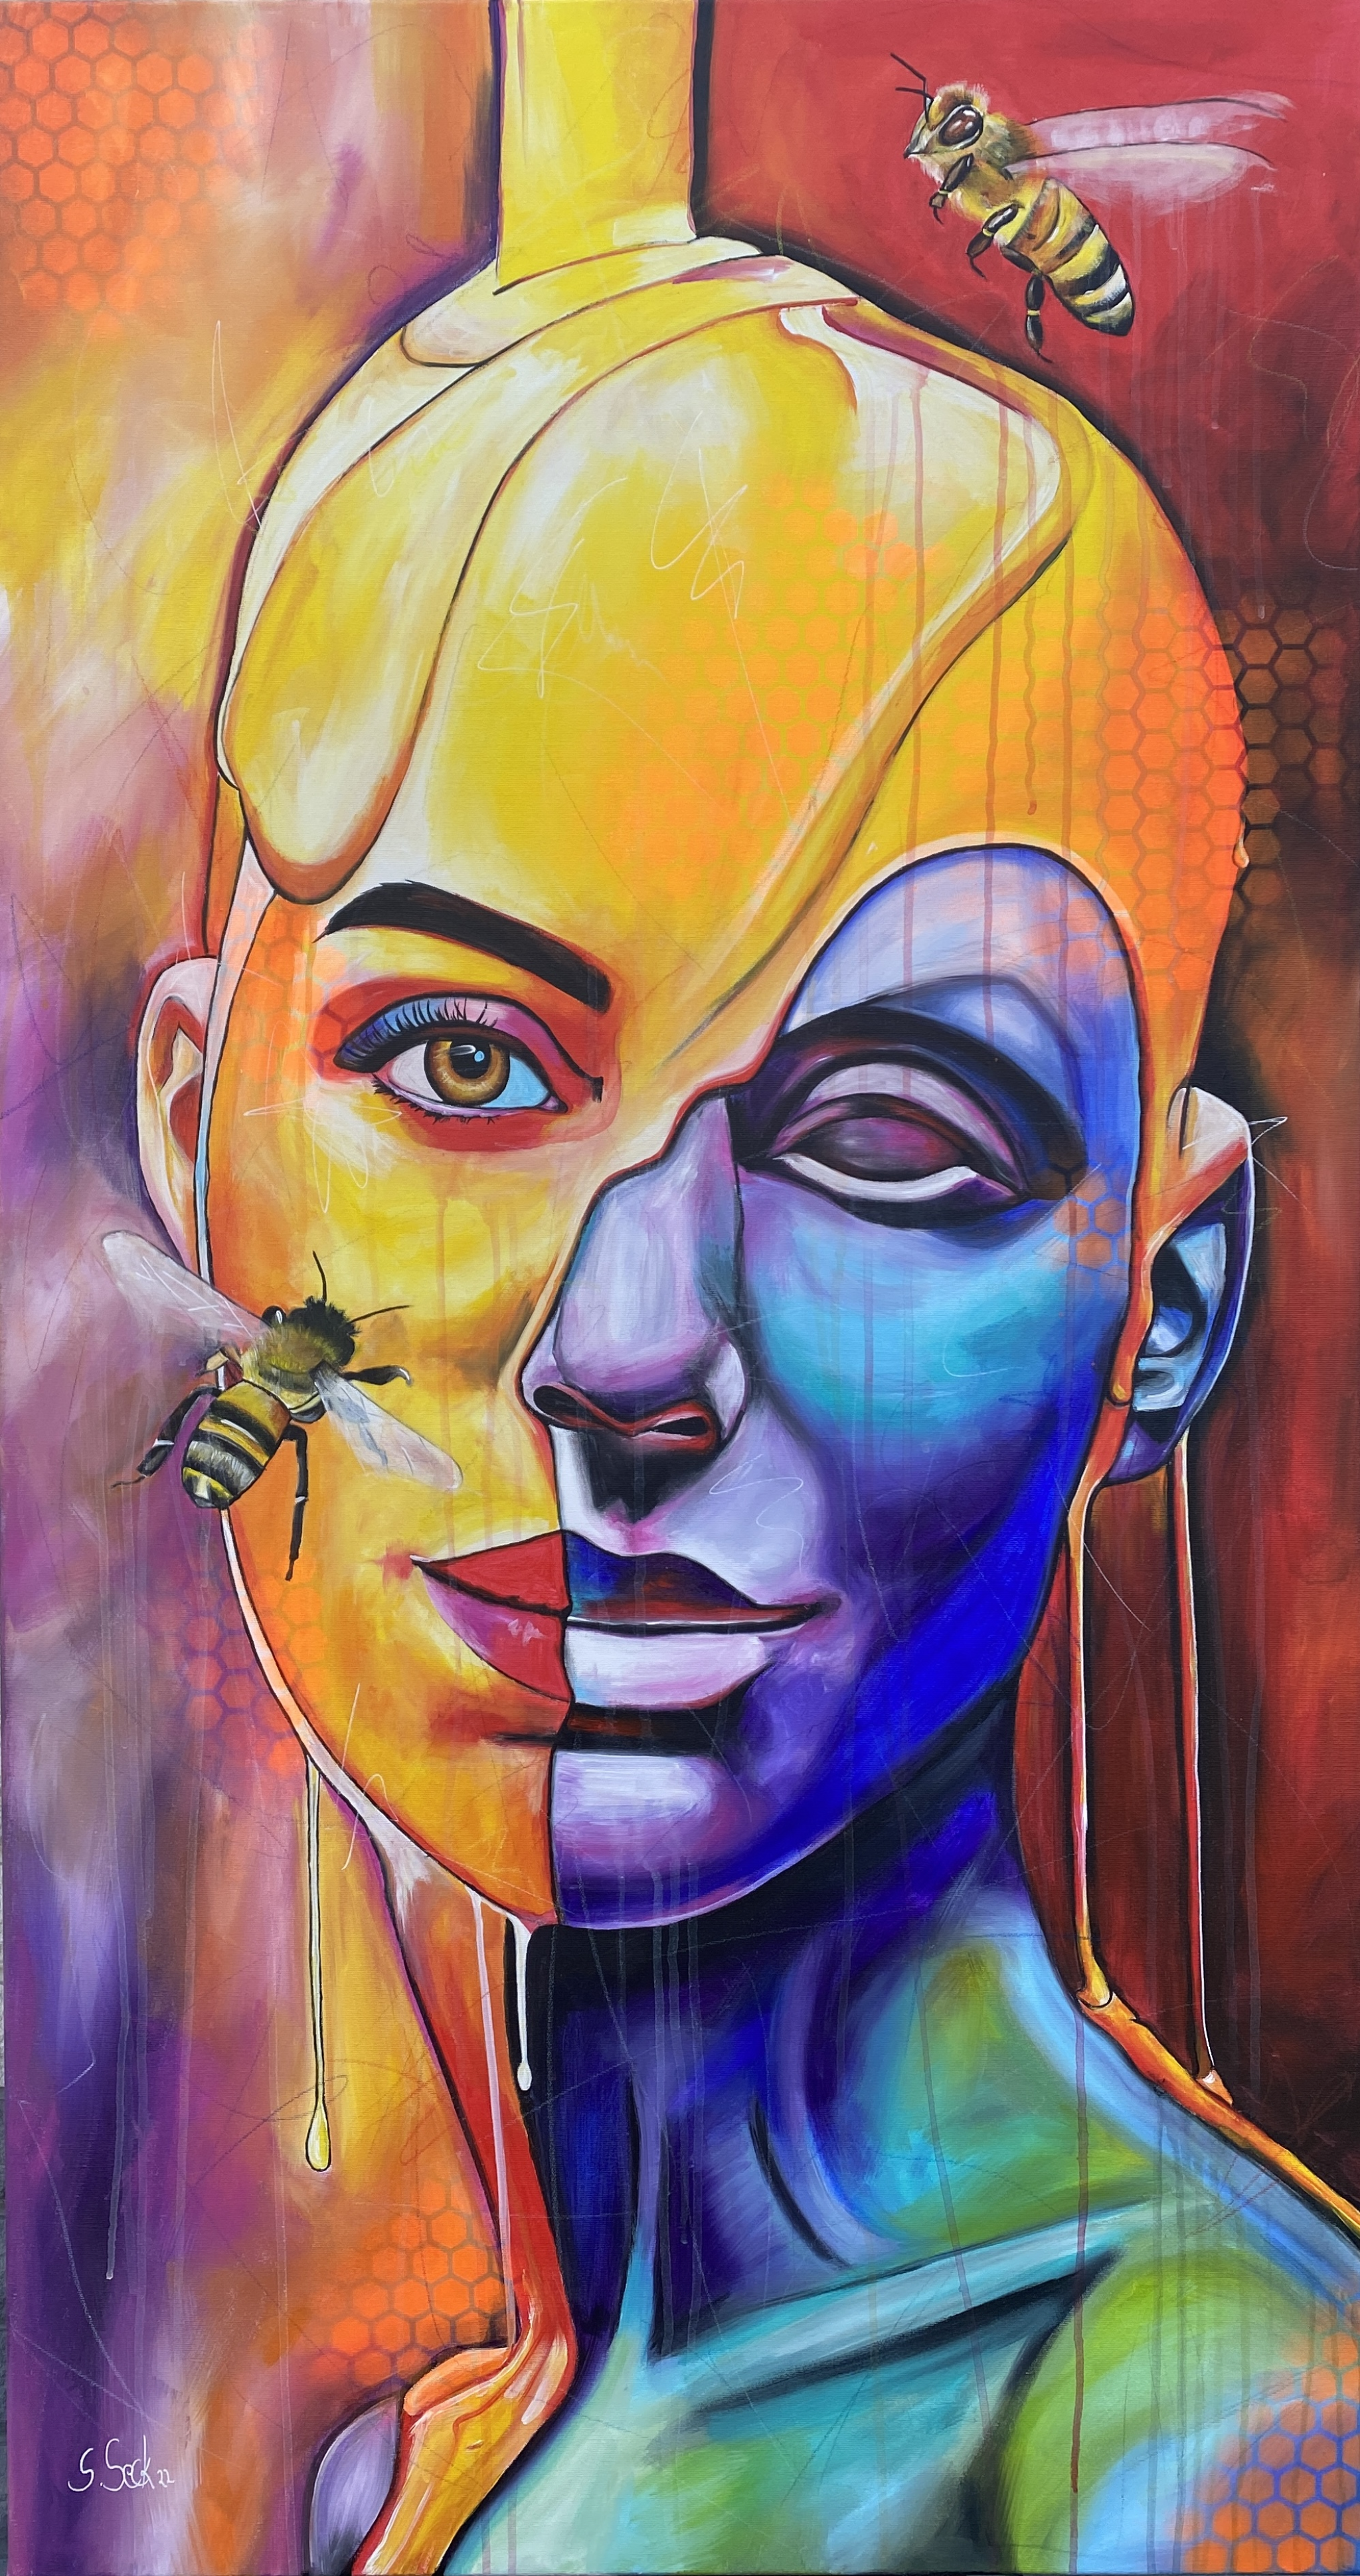 no life without bees - 80 cm x 150 cm